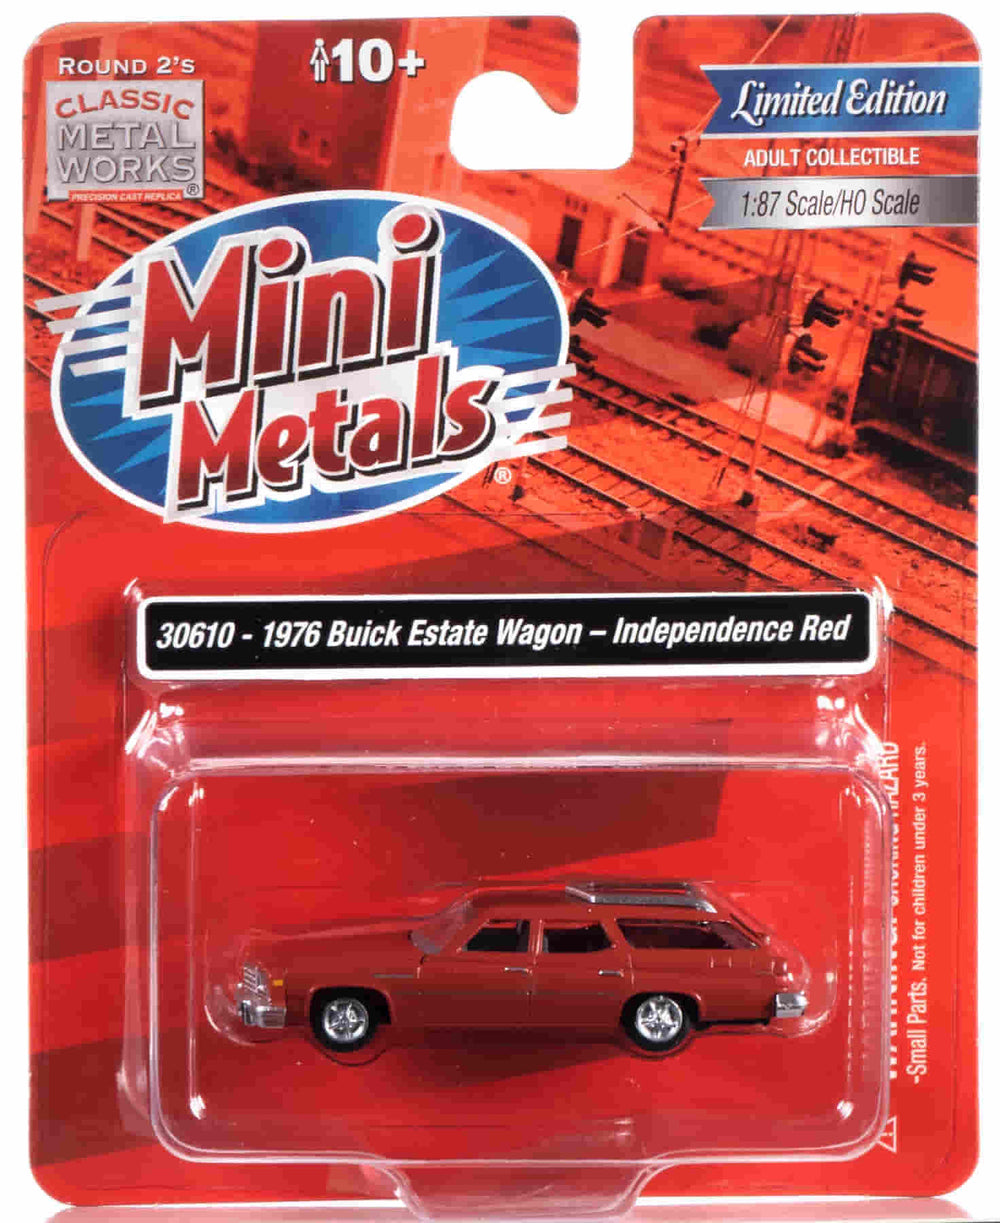 Classic Metal Works 1976 Buick Estate Wagon (Independence Red Poly) 1:87 HO Scale